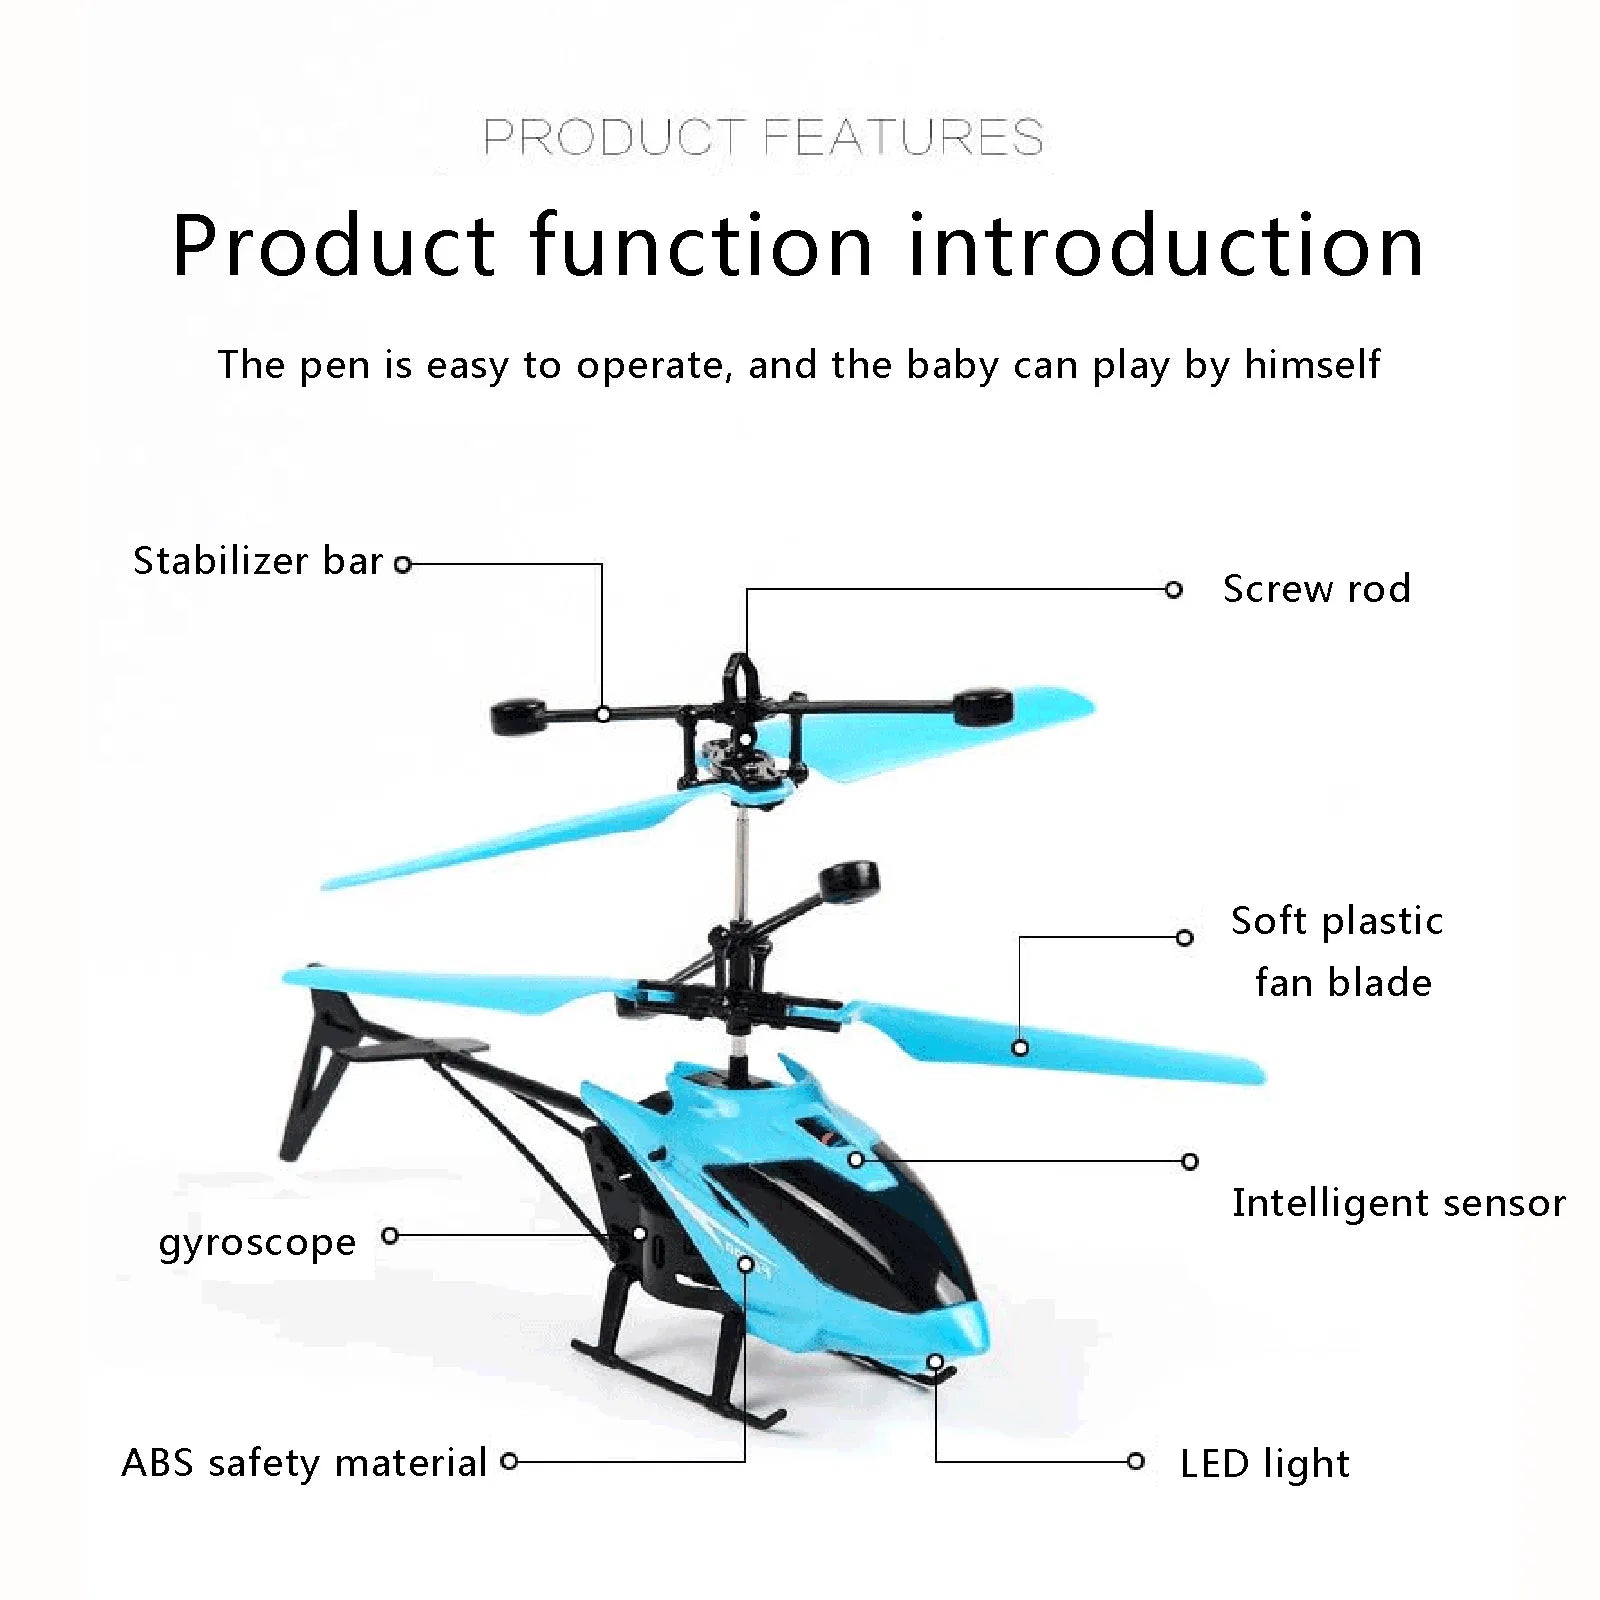 YKF1303 RC Helicopter, PRODUCT FEATURES The pen is easy to operate, and the baby can play